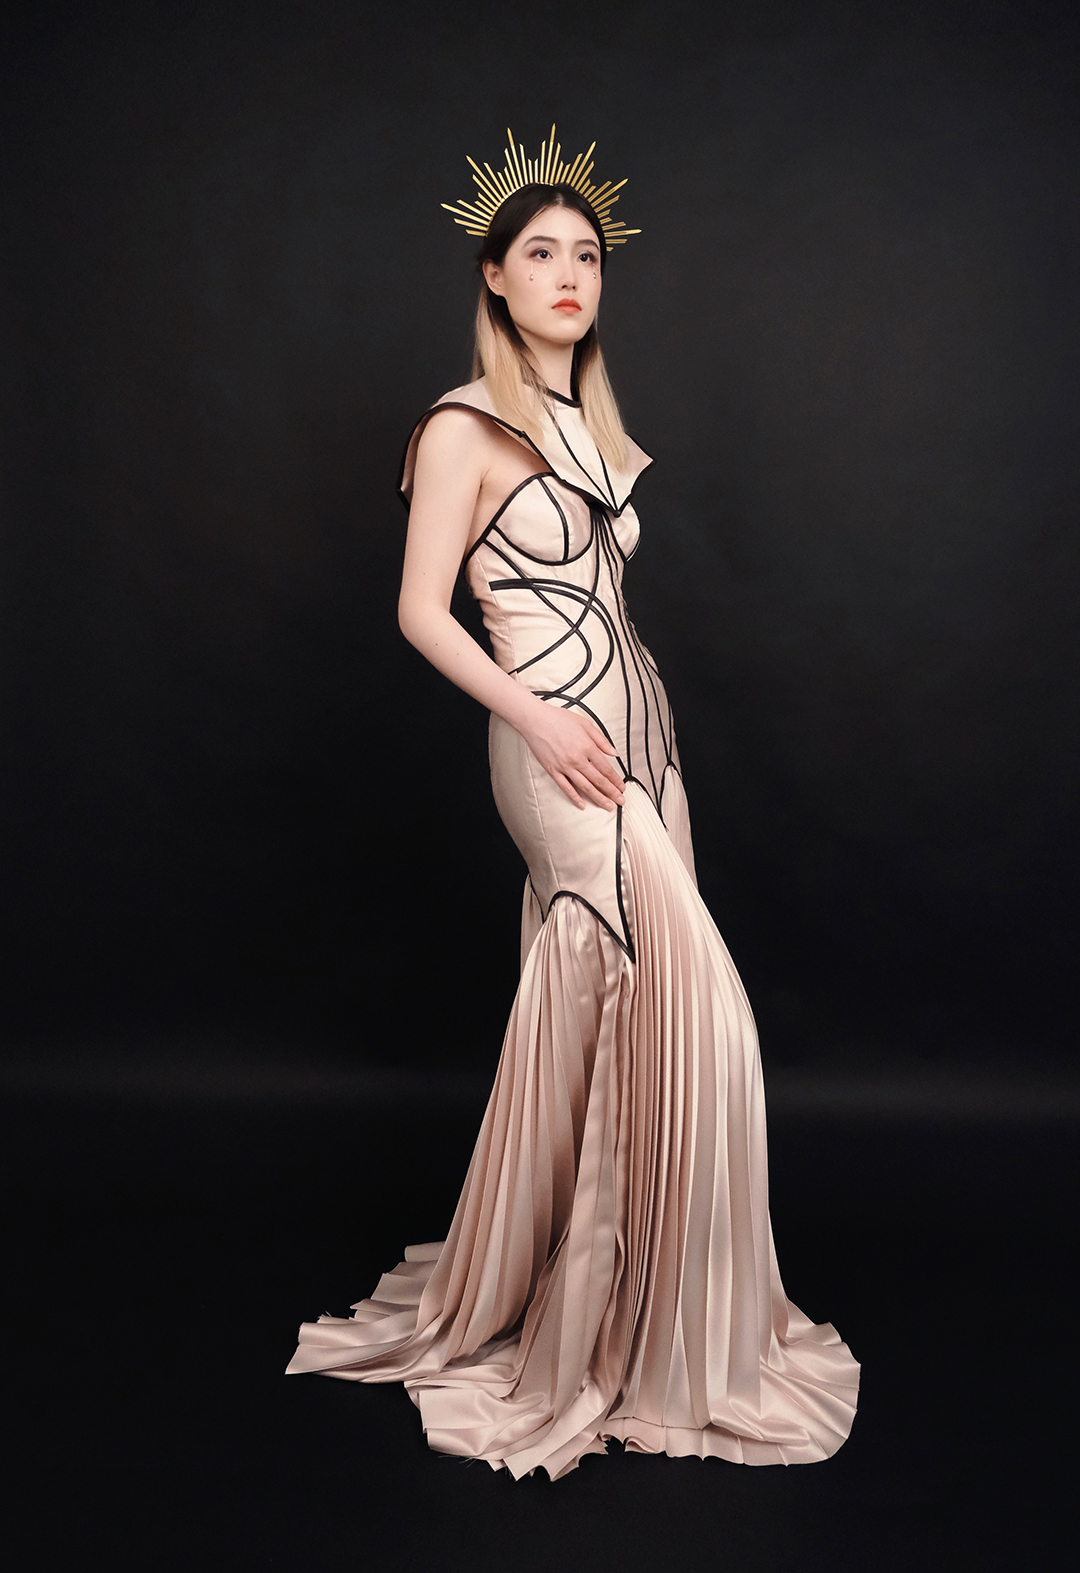 Side view of a model wearing a mermaid gown with fitted torso and pleated godets in the bottom. The model is wearing a hairband that gives a halo look. She has her visible hand on her thigh.